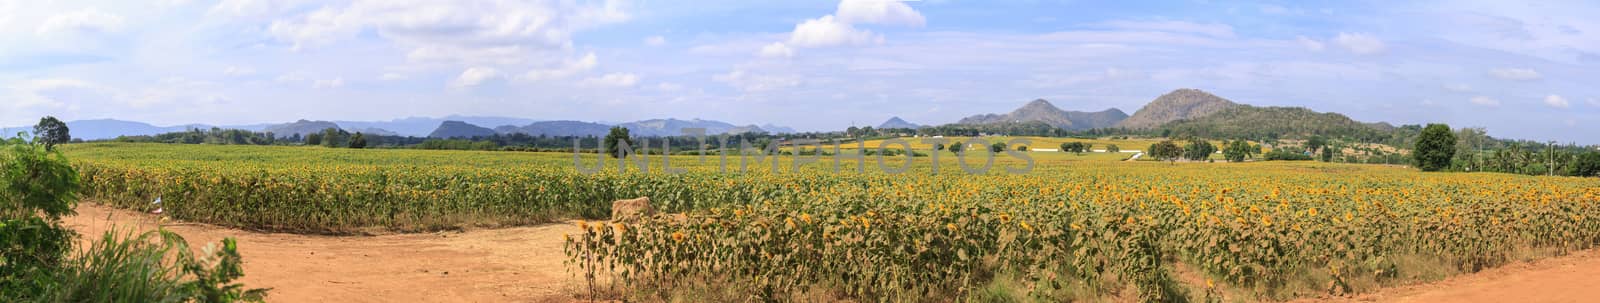 Wonderful panoramic view of sunflowers field under blue sky, Nature summer landscape